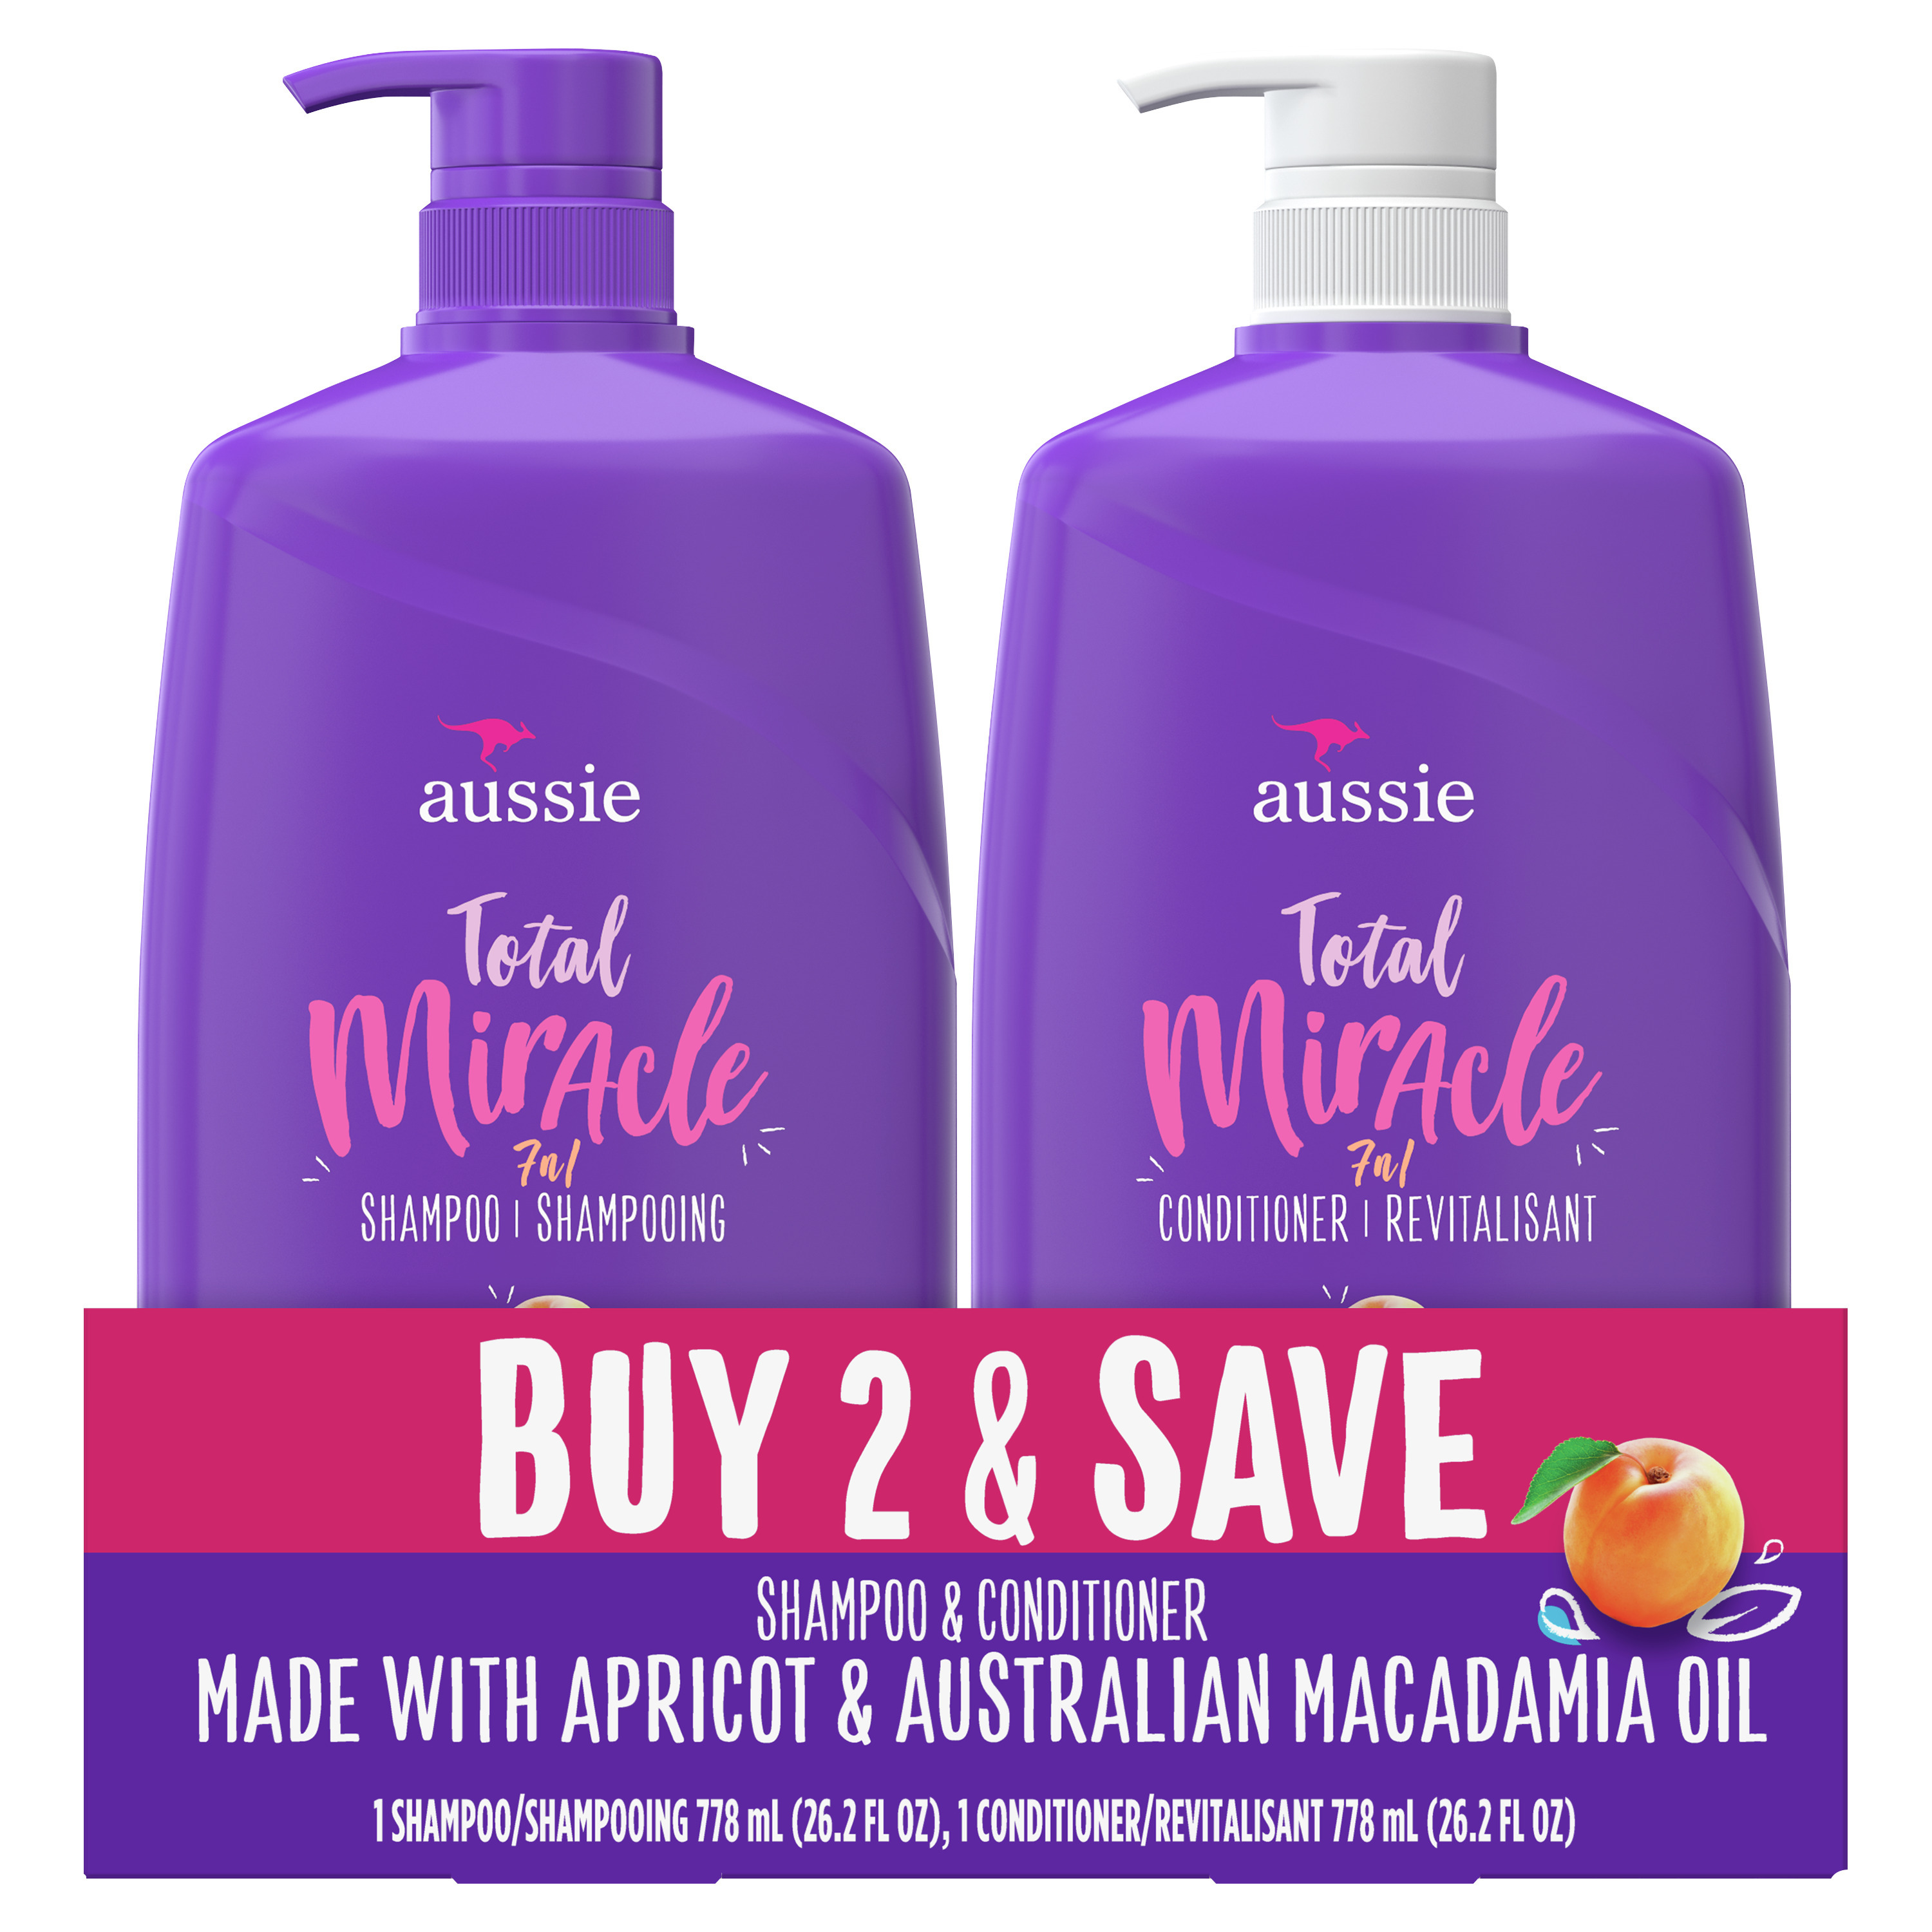 Aussie Total Miracle Apricot & Macadamia Oil, Shampoo & Conditioner Pack, All Hair Types, 26.2 fl oz - image 3 of 10